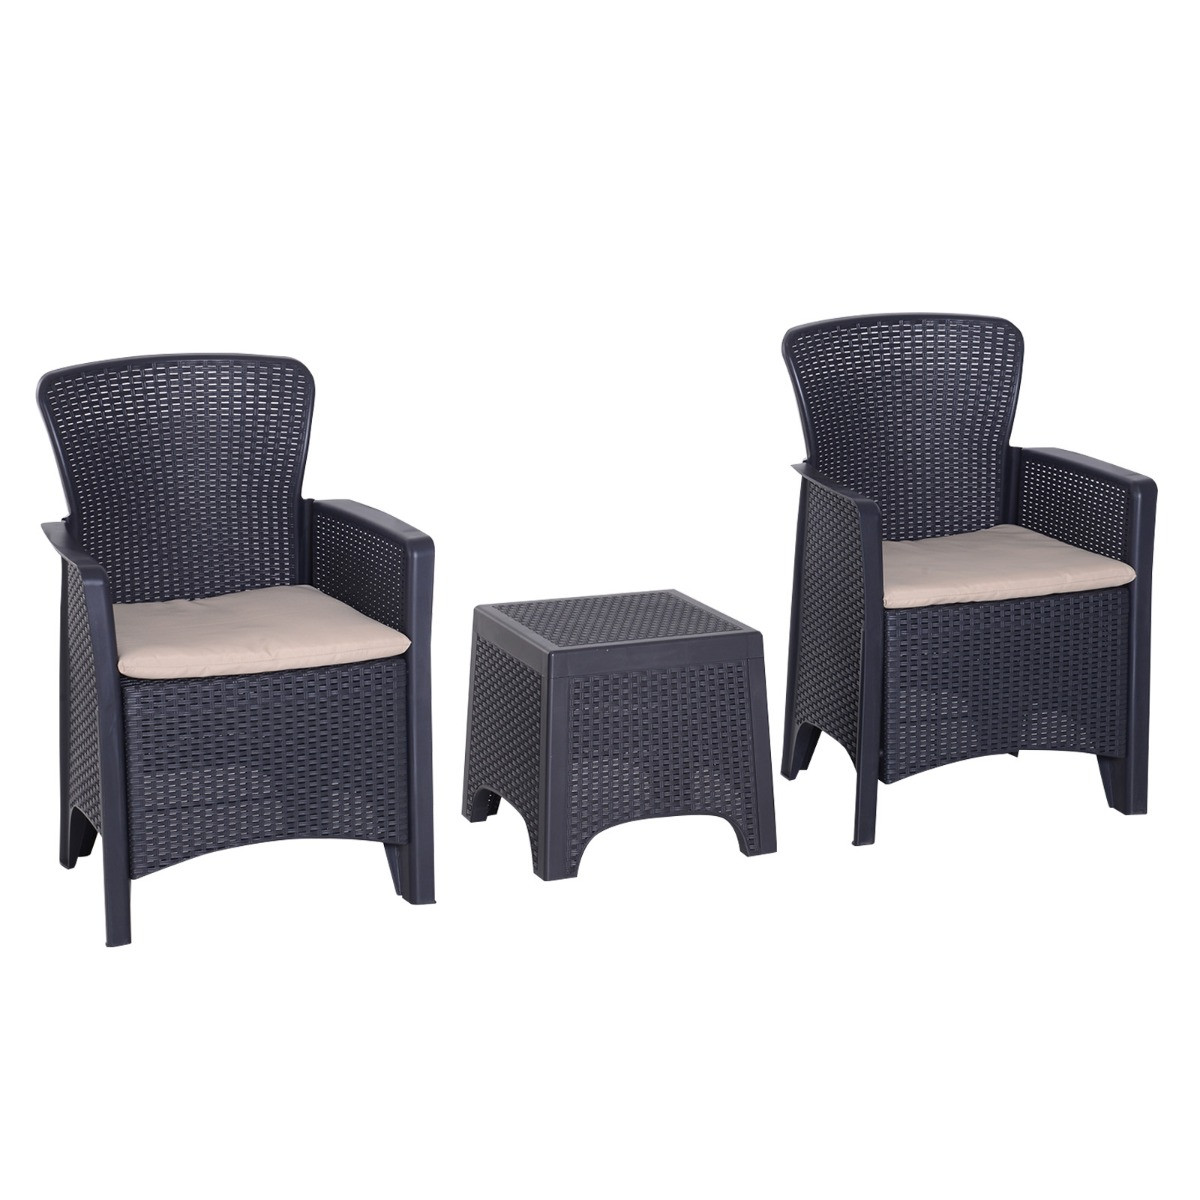 Outsunny Rattan Effect Garden Bistro Set With Coffee Table, 3 Piece - Graphite>